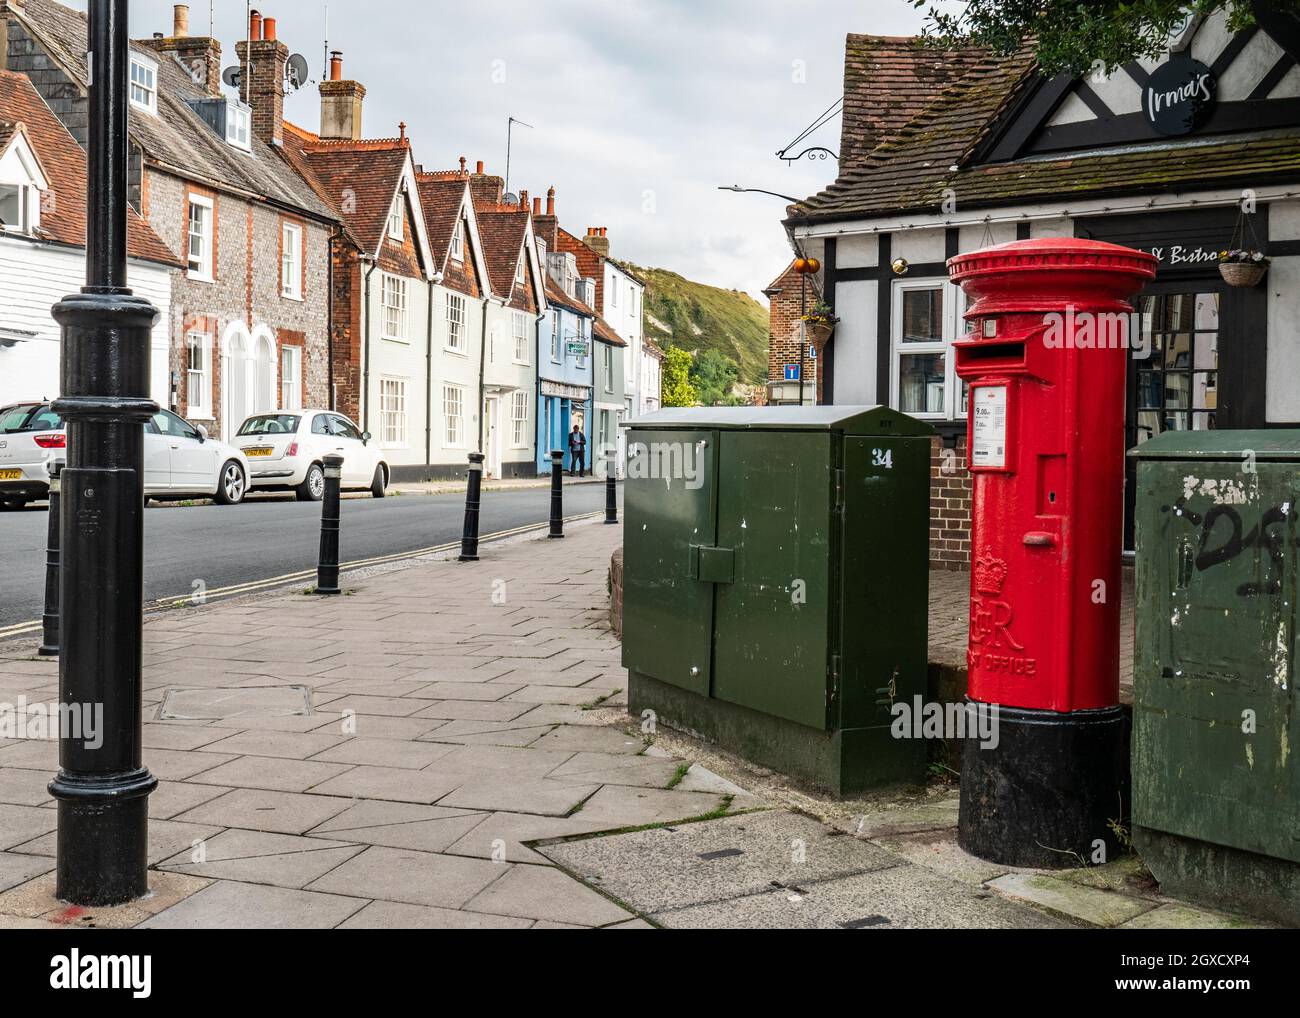 Cliffe, Lewes, East Sussex, England, UK. A traditional rural English street scene with post box and village store. Stock Photo